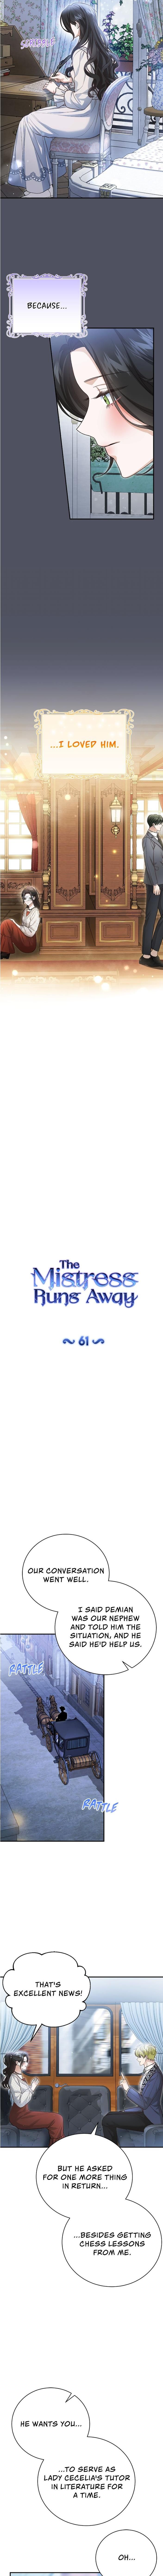 The Mistress Runs Away Chapter 61 - Page 3